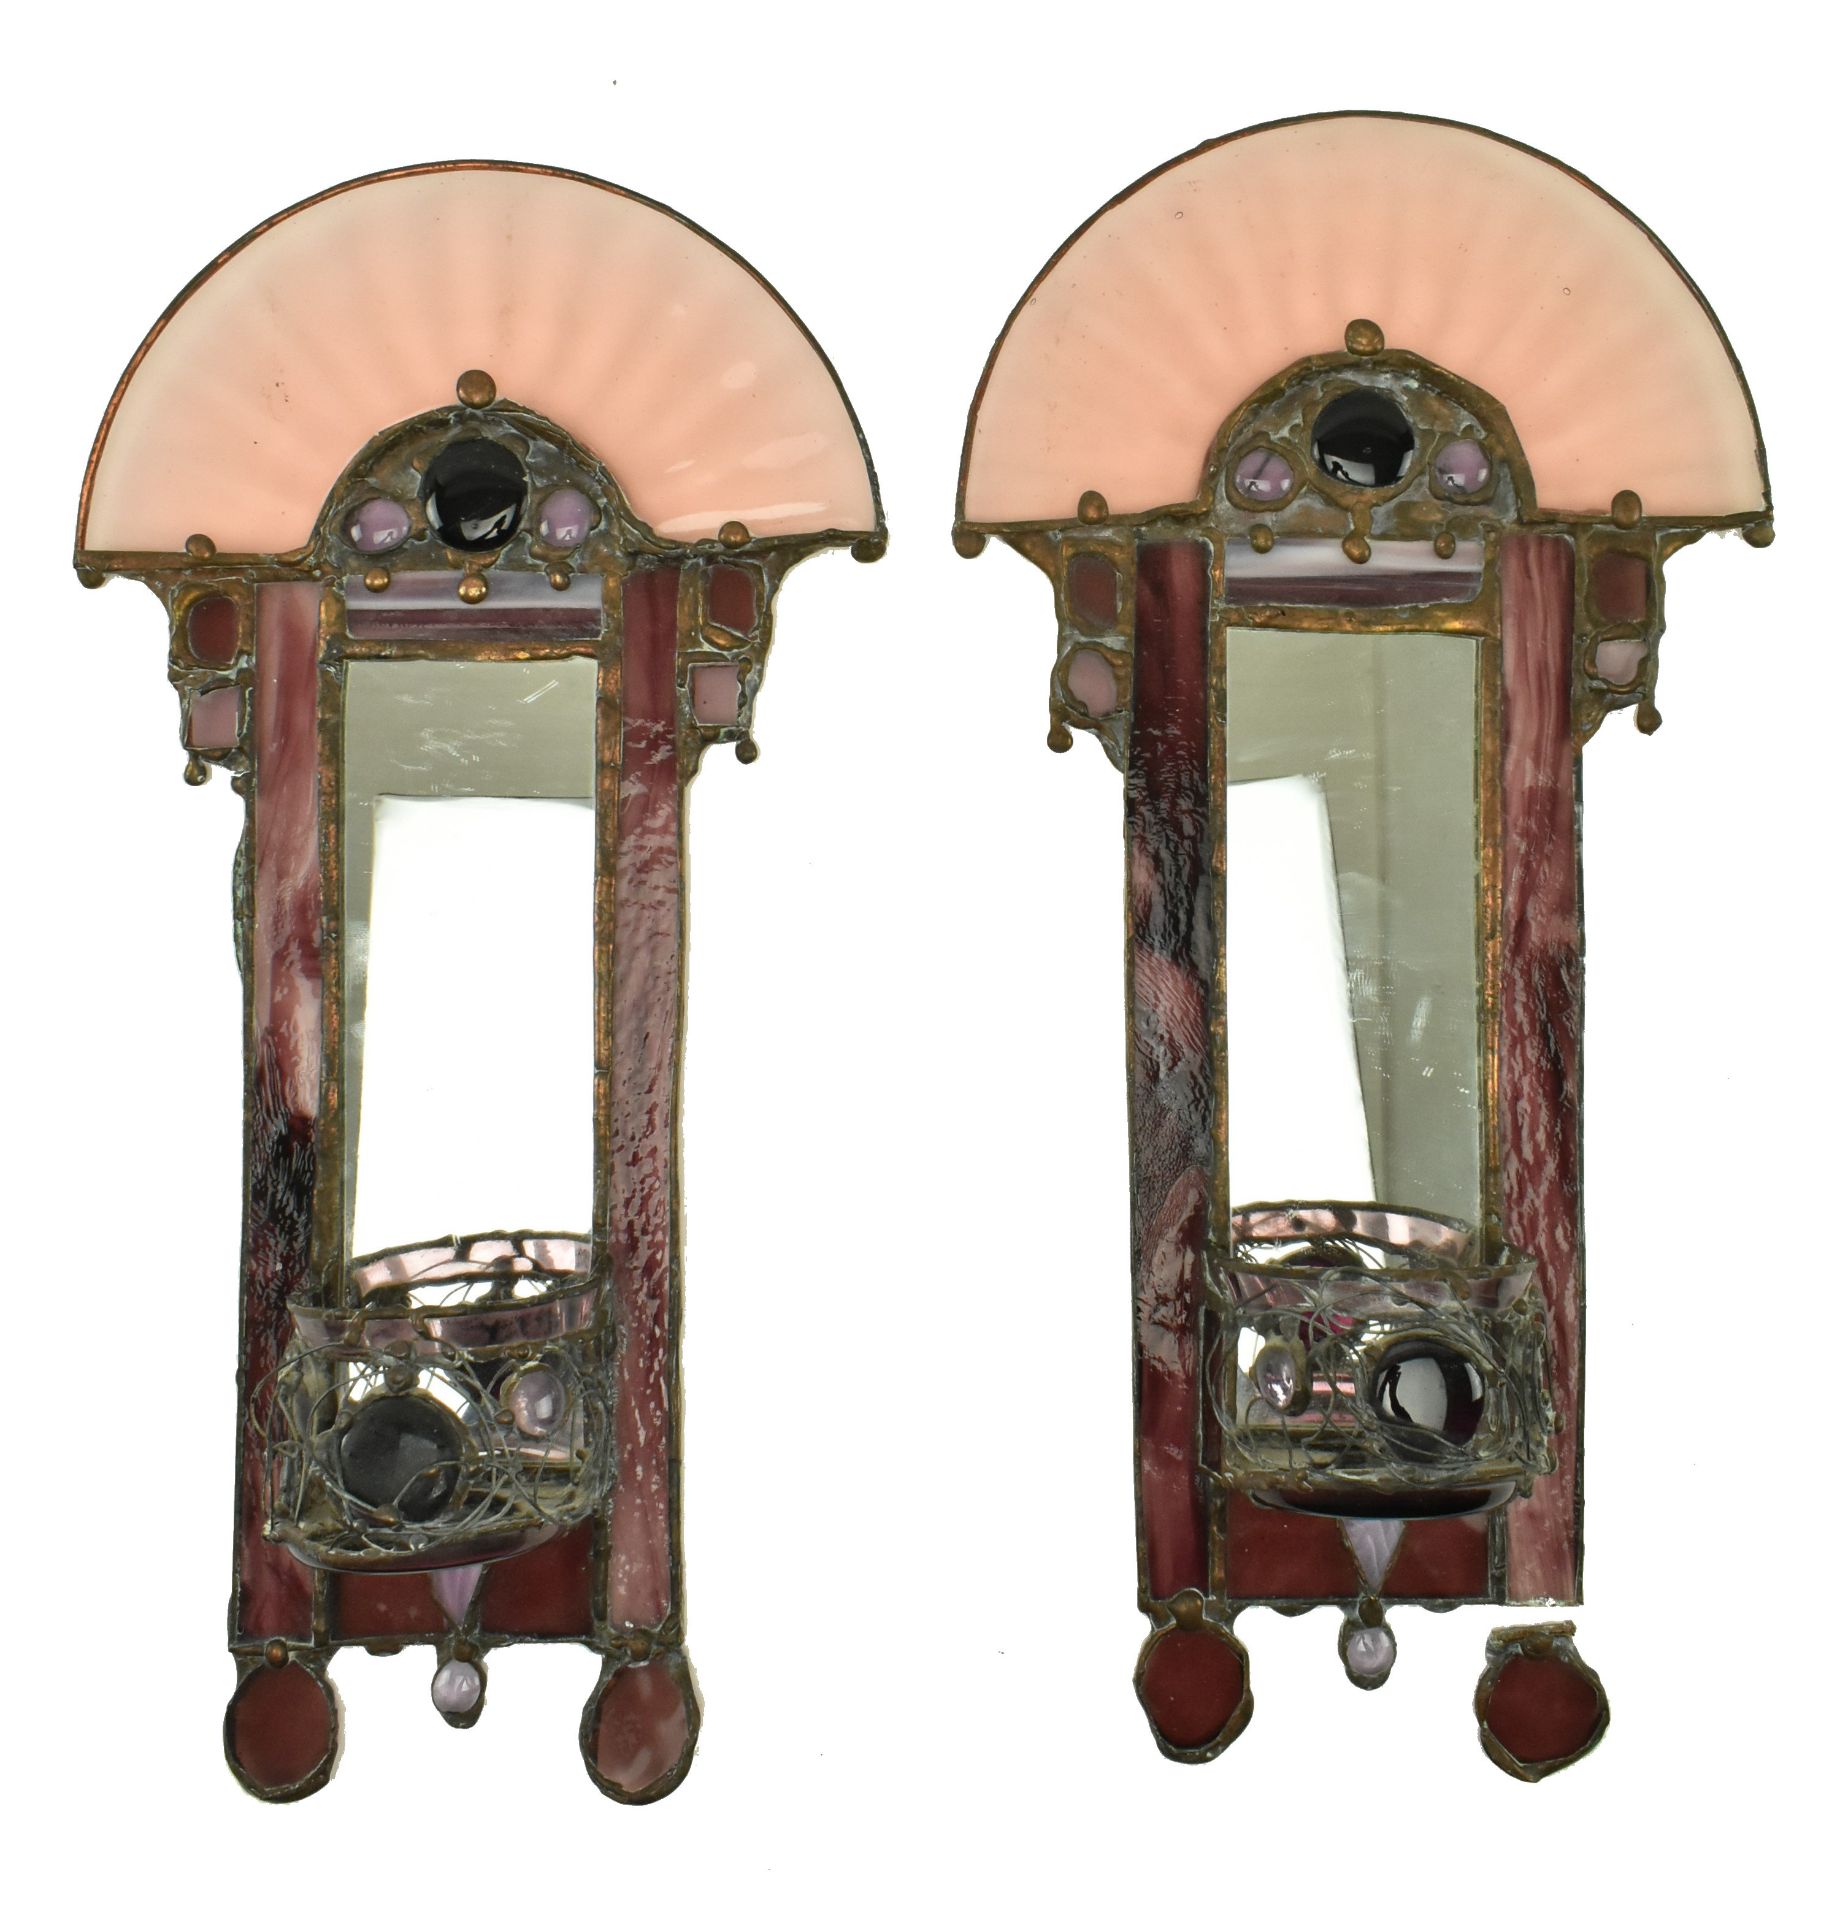 JOHN LEATHWOOD - PAIR OF STAINED LEADED GLASS WALL SCONCES